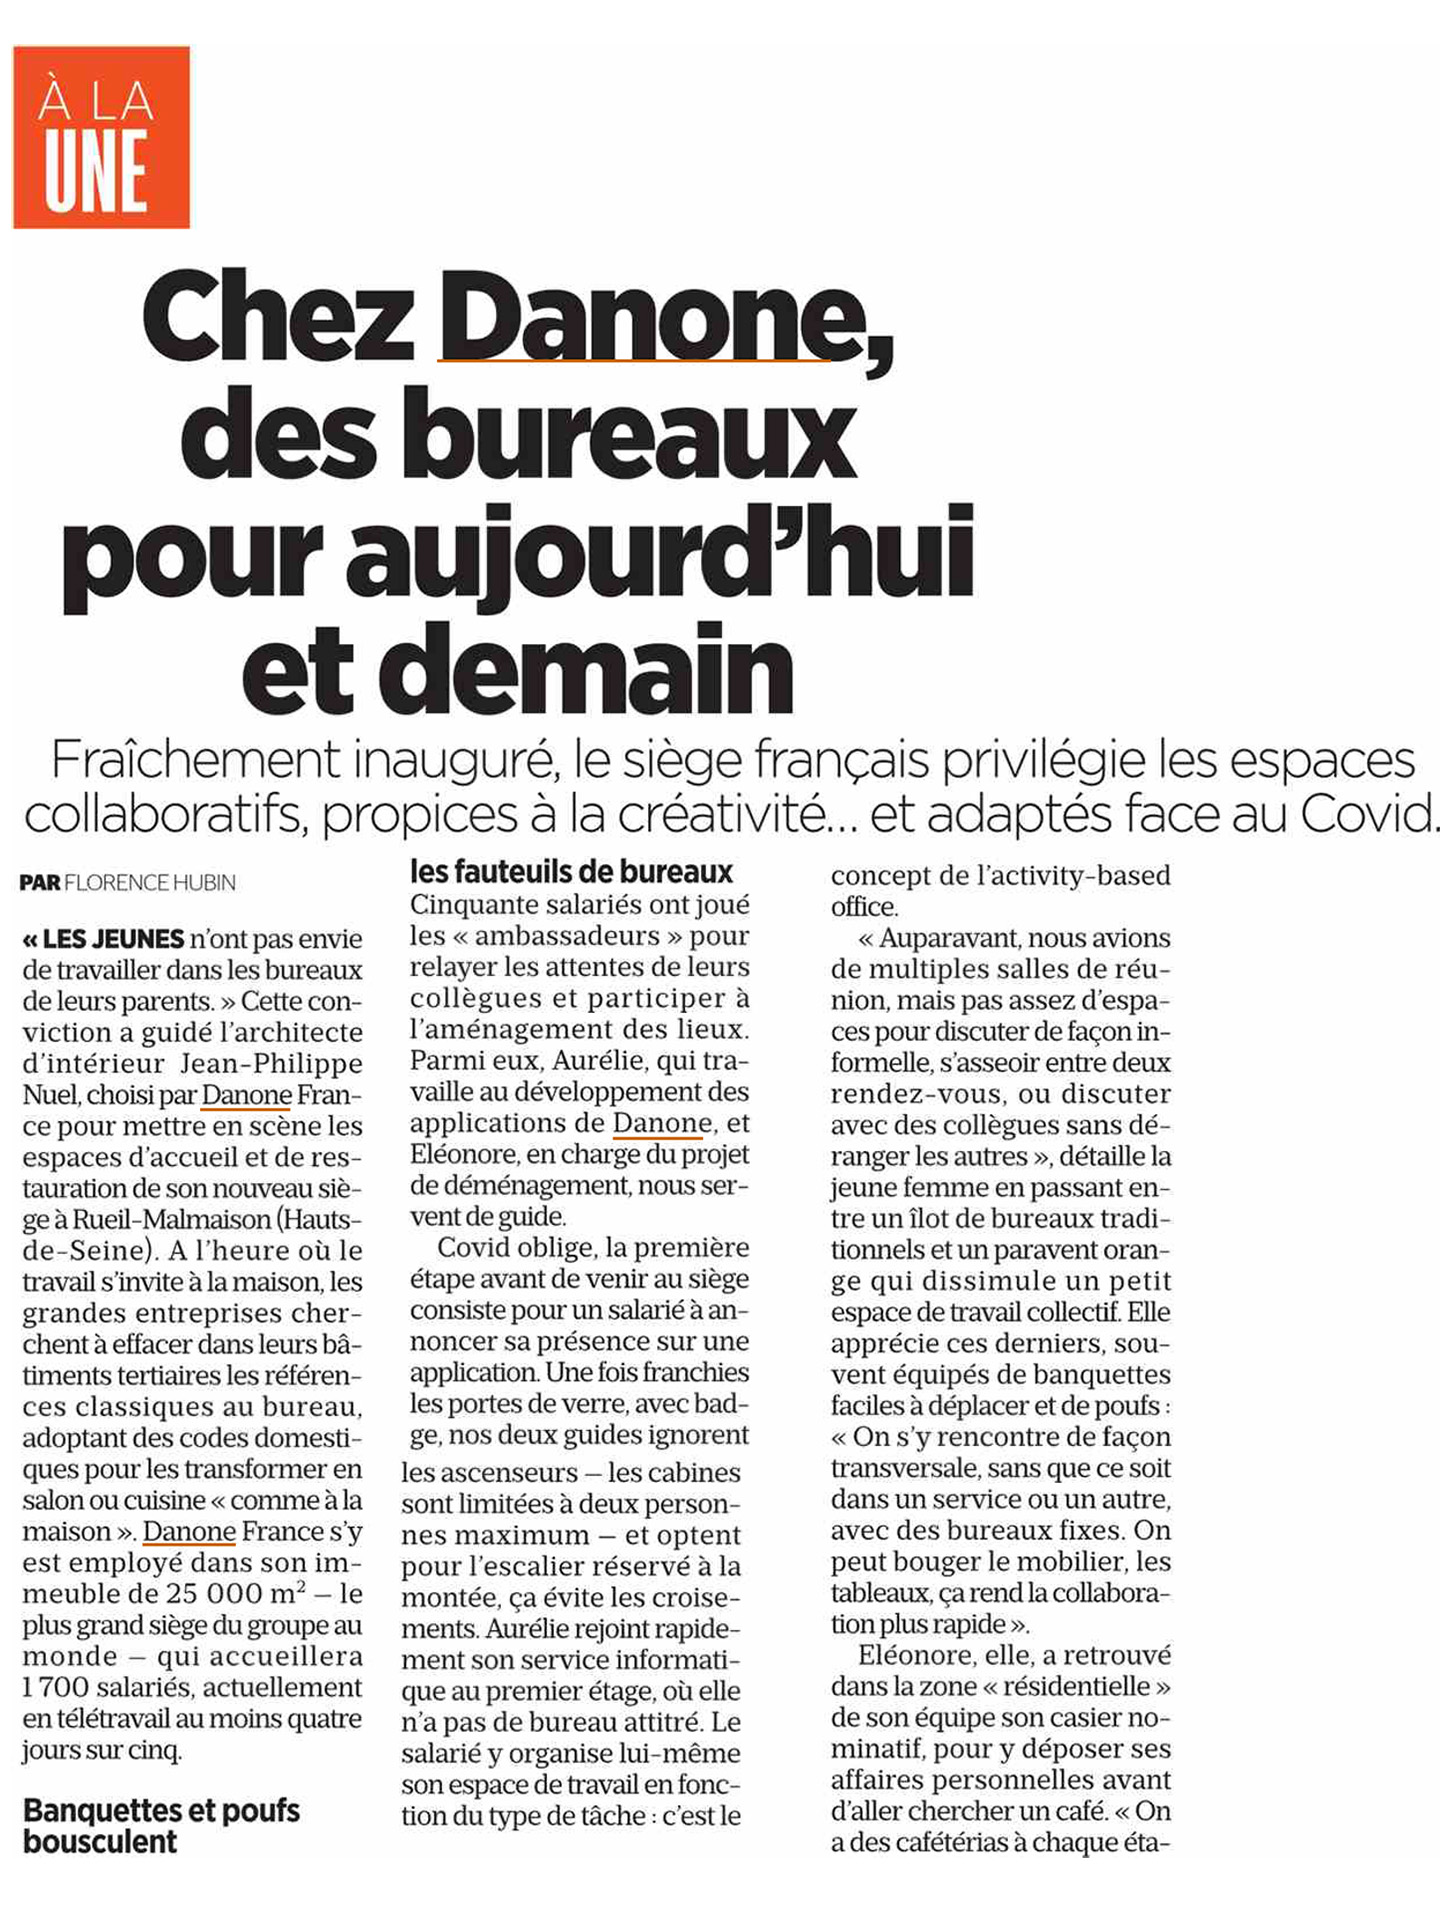 Article of the magazine aujourd'hui en france about the studio jean-philippe nuel on the project danone convergence, tertiary interior architecture, interior design, headquarters